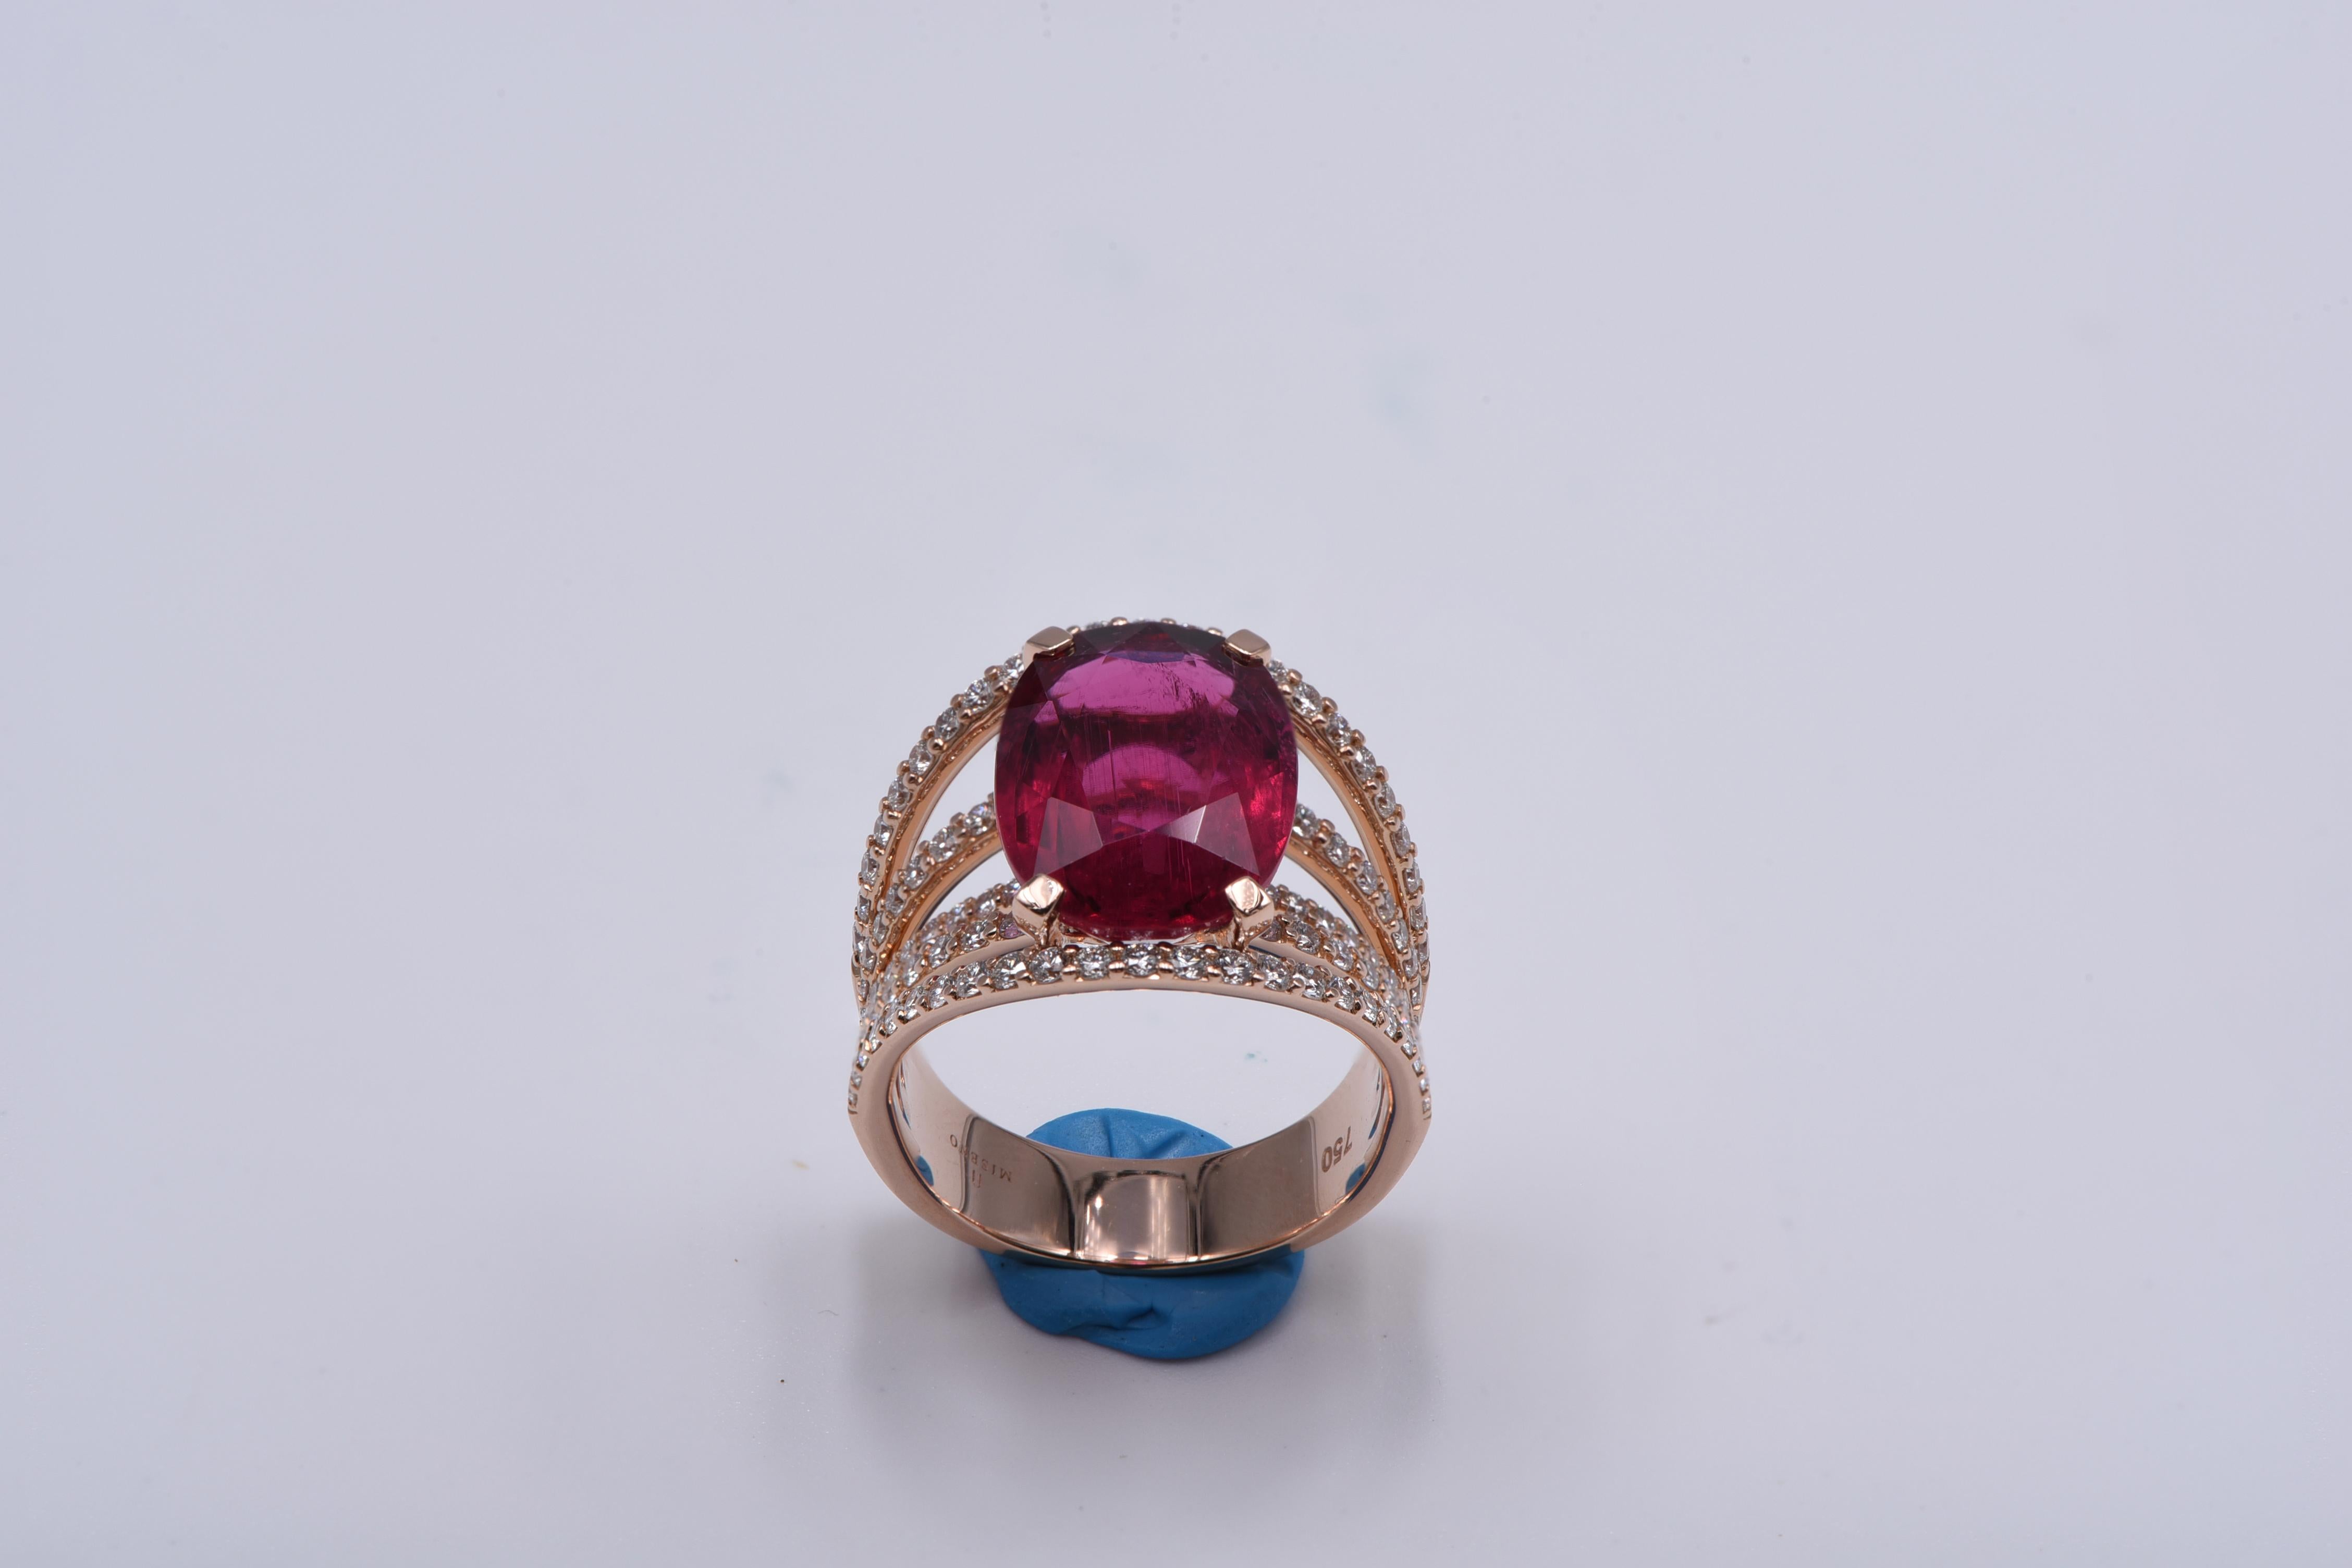 Round Cut 18kt Rose Gold Ring with White Diamonds and Oval Shaped Rubellite Center Stone For Sale